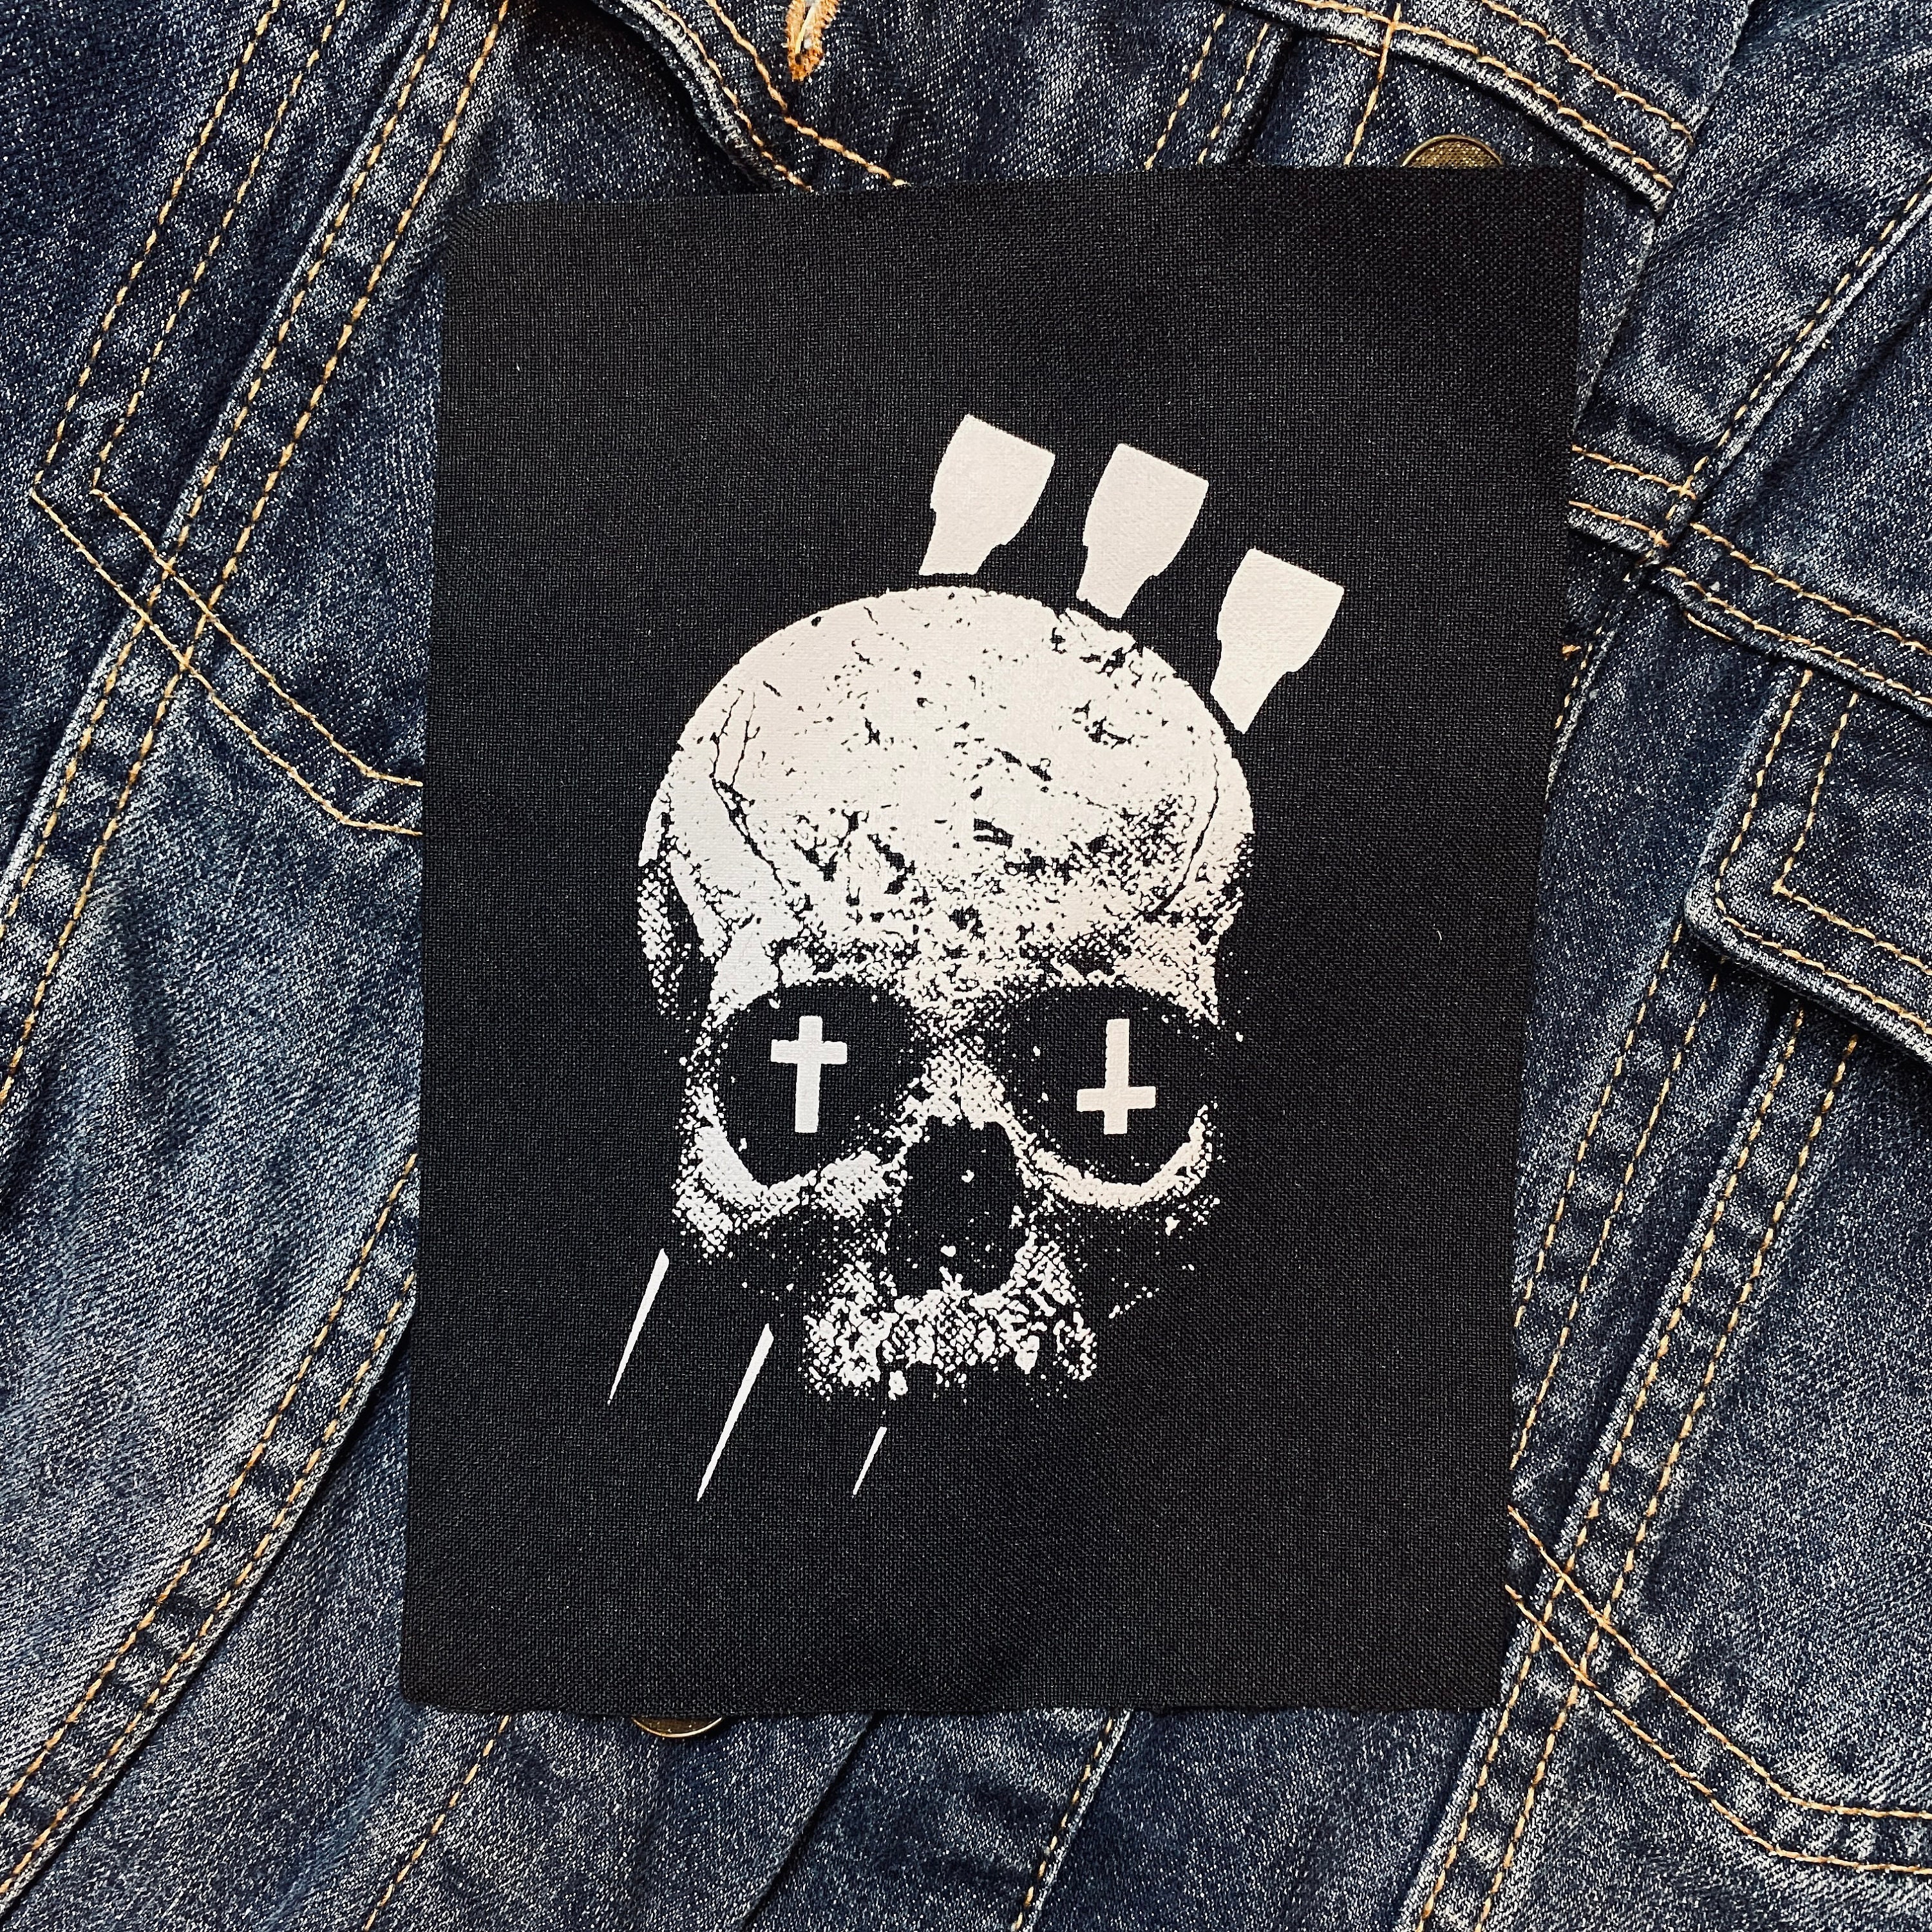 Shop Embroidered Patches for Clothing | Iron-On Stickers: Lantern Man,  Skull Biker Stripes, and More | Buy Jackets Patches Online